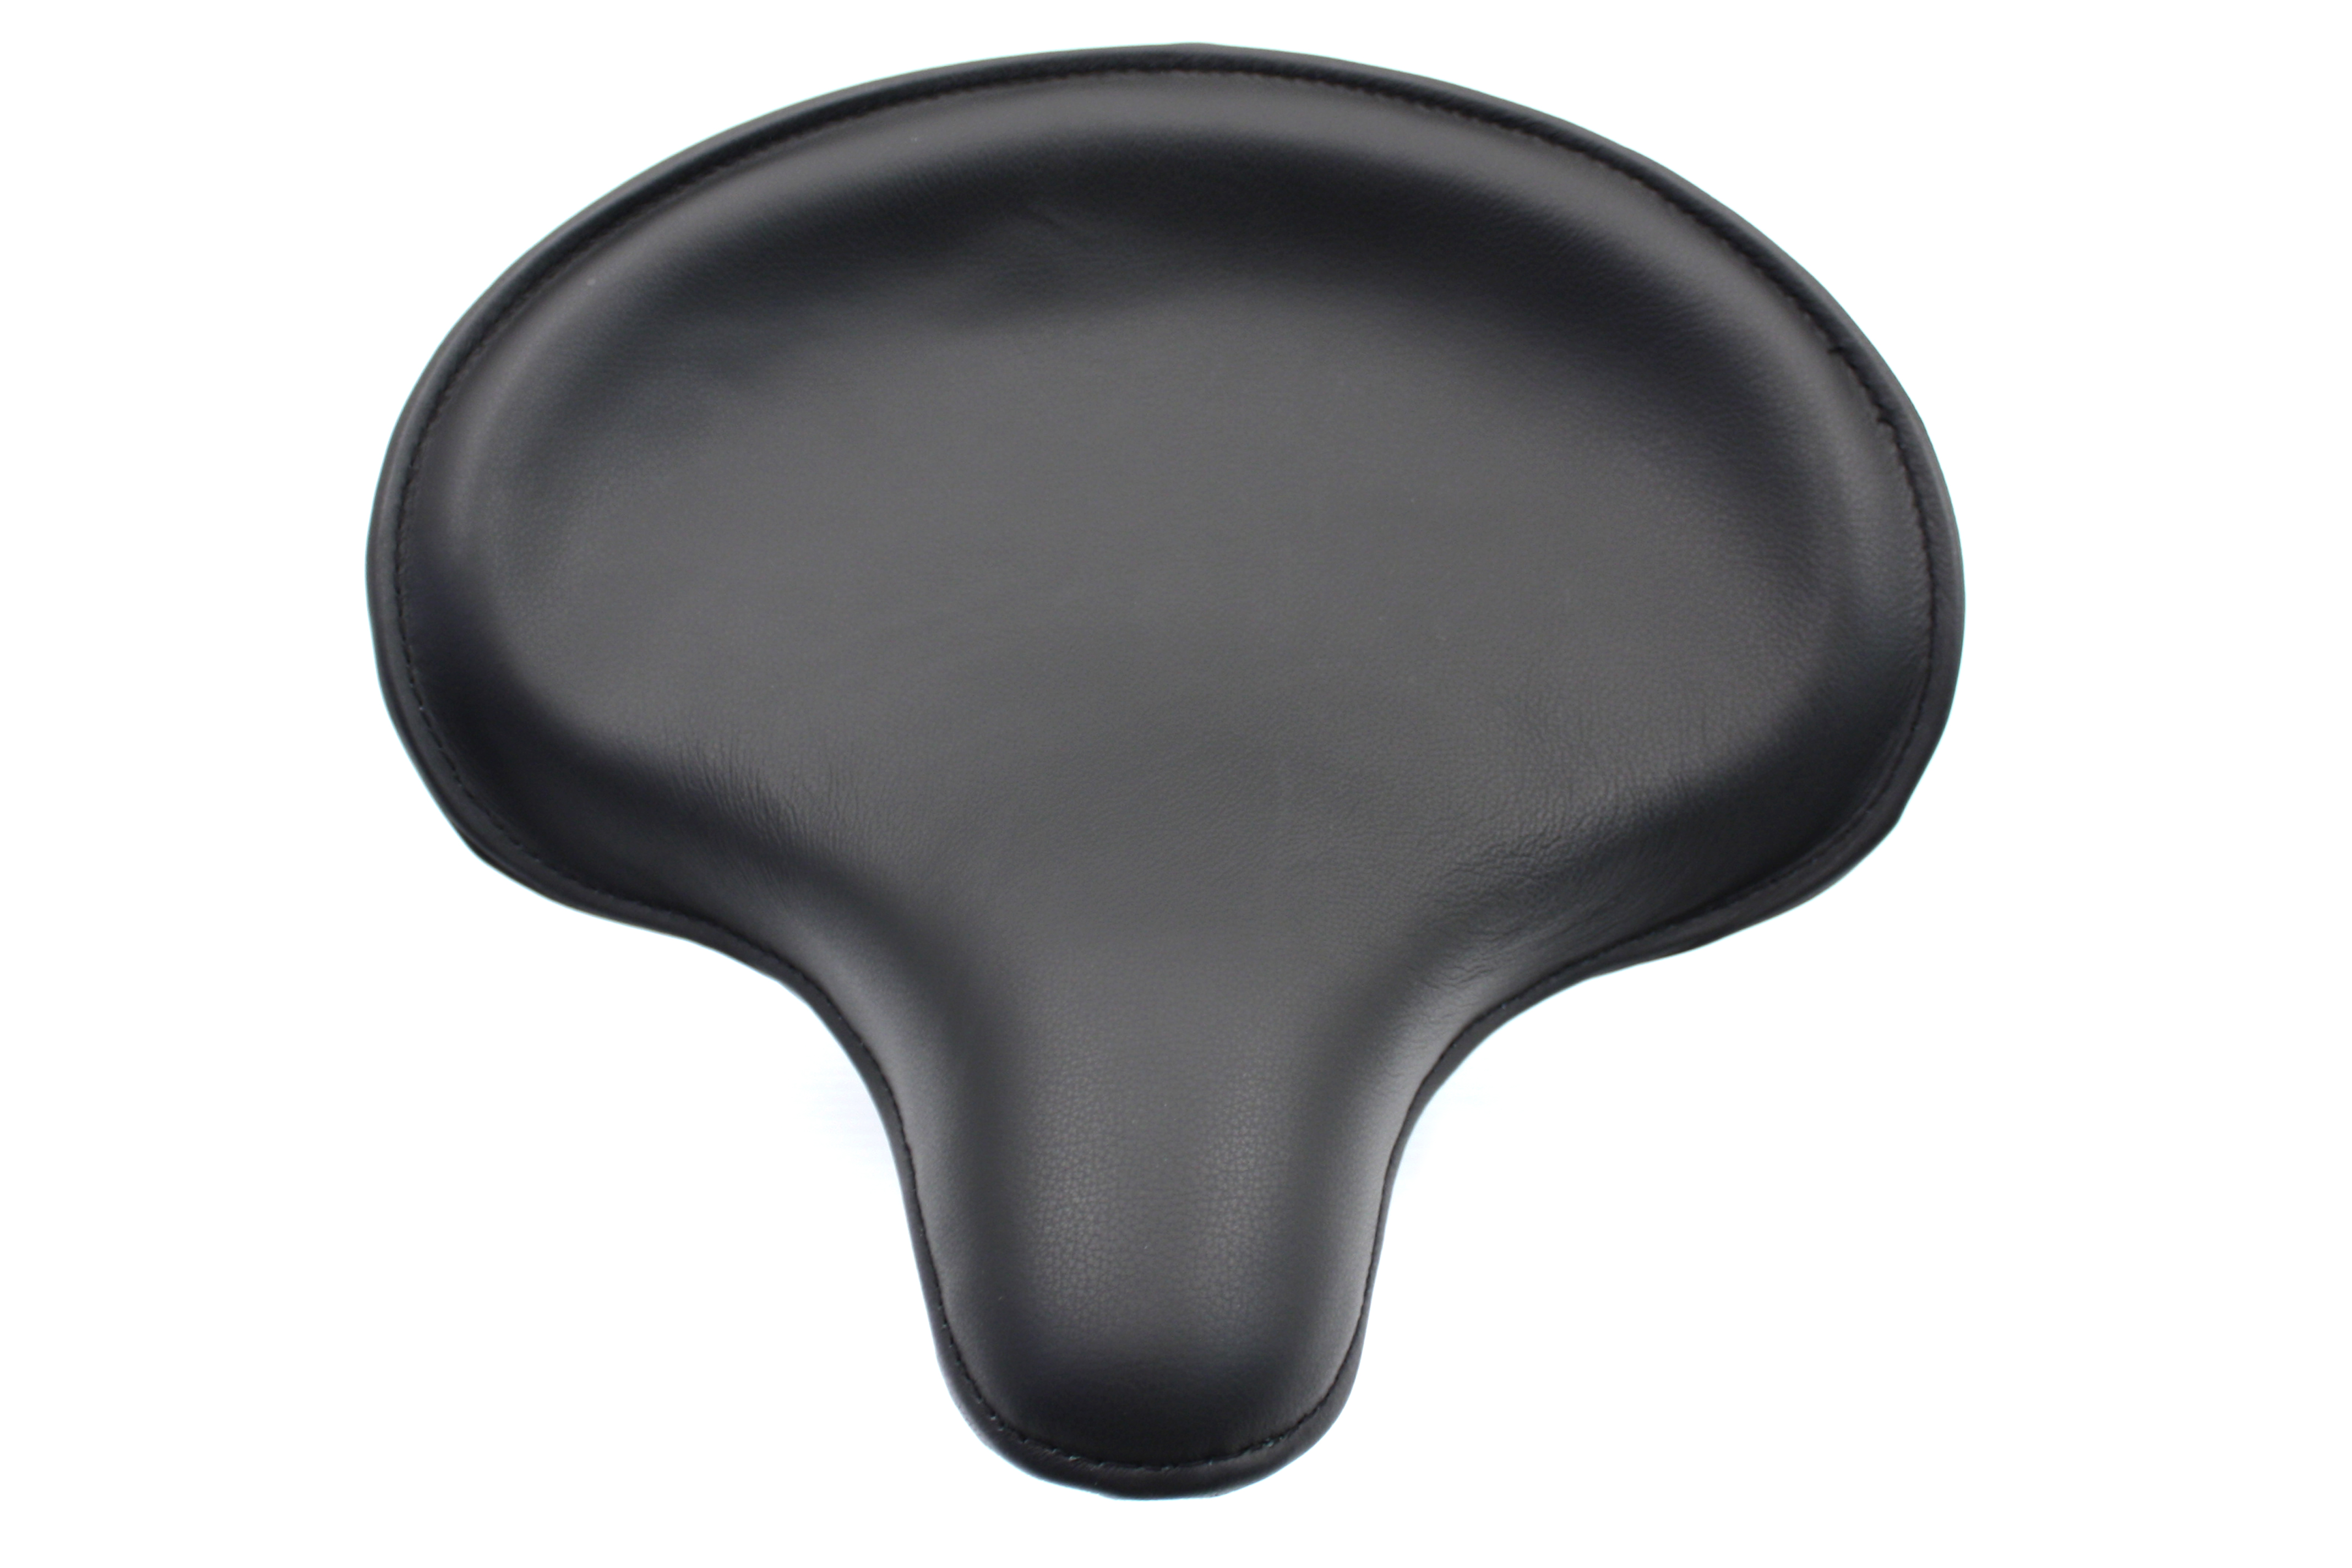 Replica Black Leather Solo Seat for 1929-84 Harley Big Twins